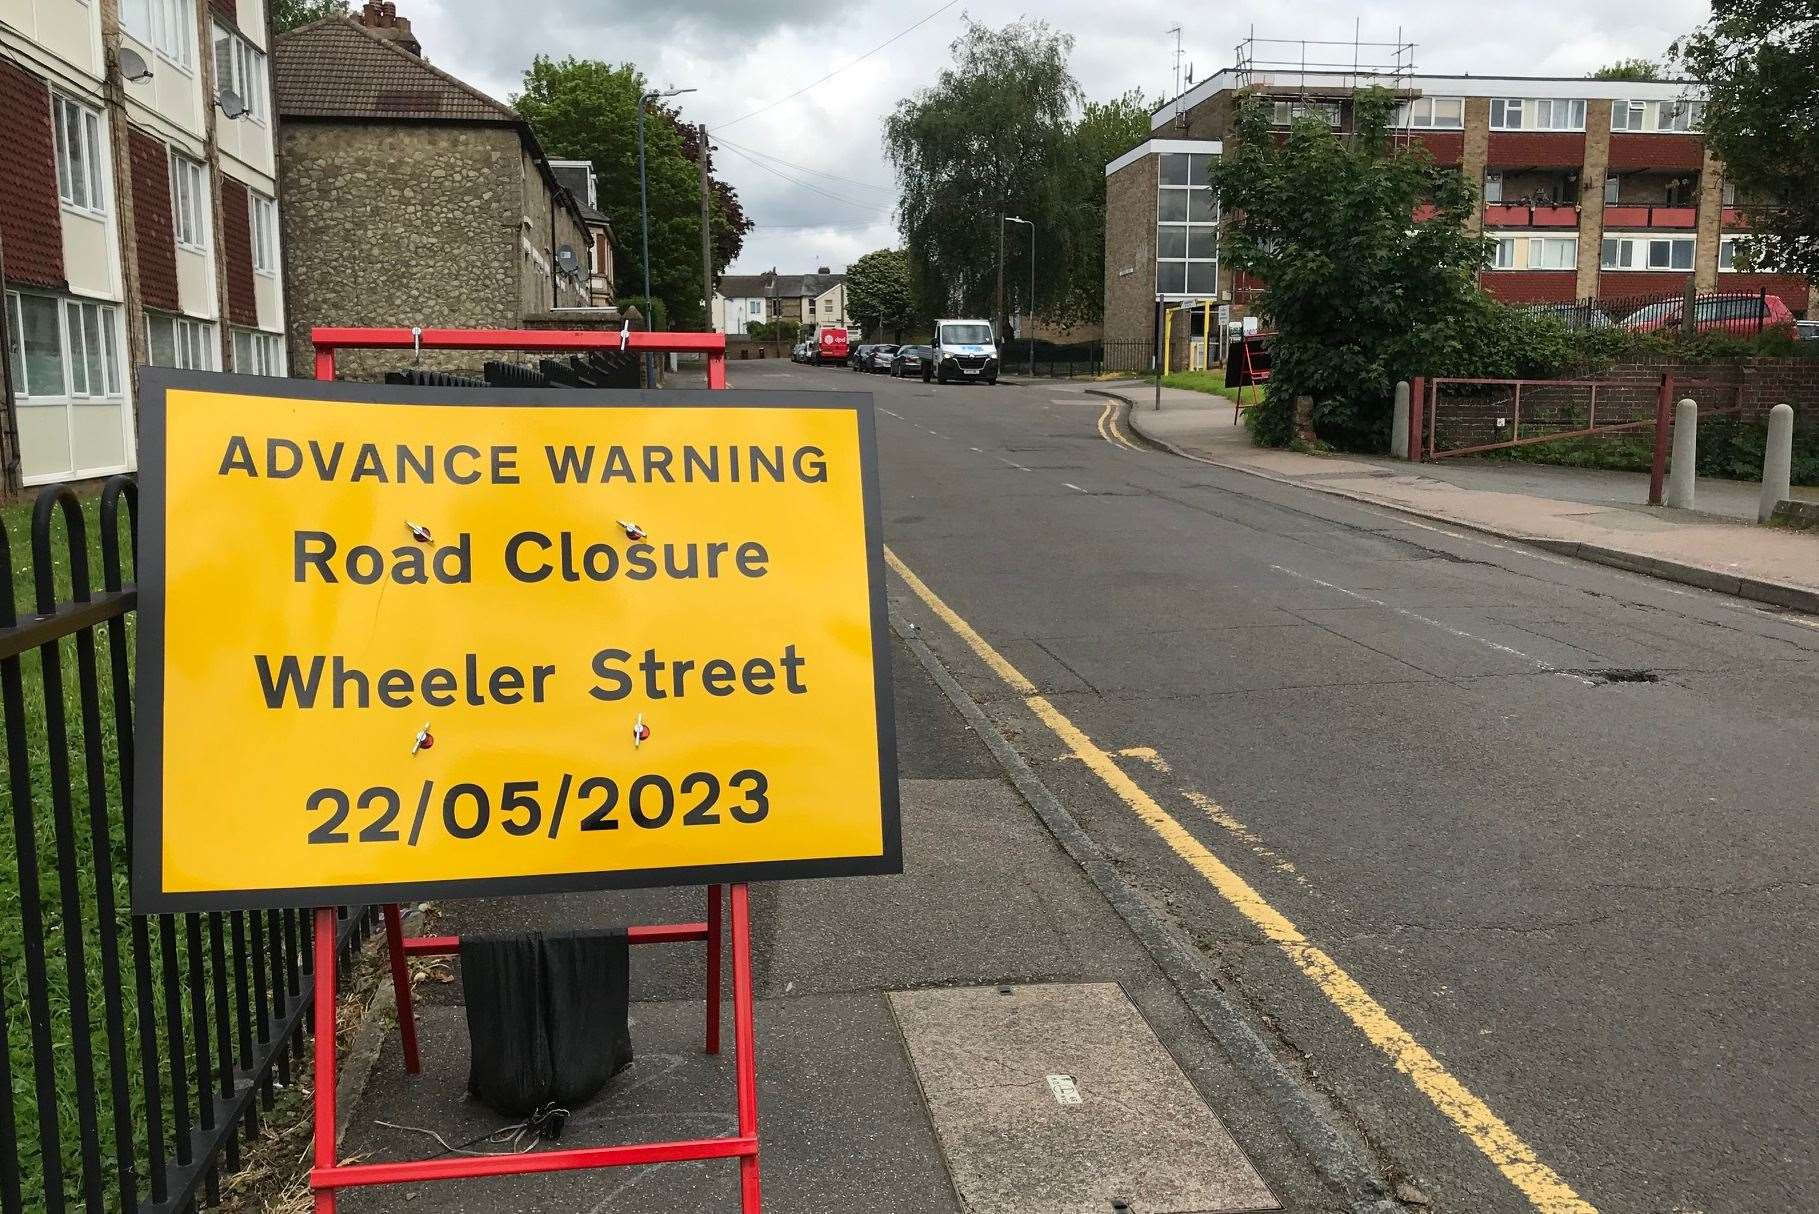 Road closure sign put up along Wheeler Street in Maidstone